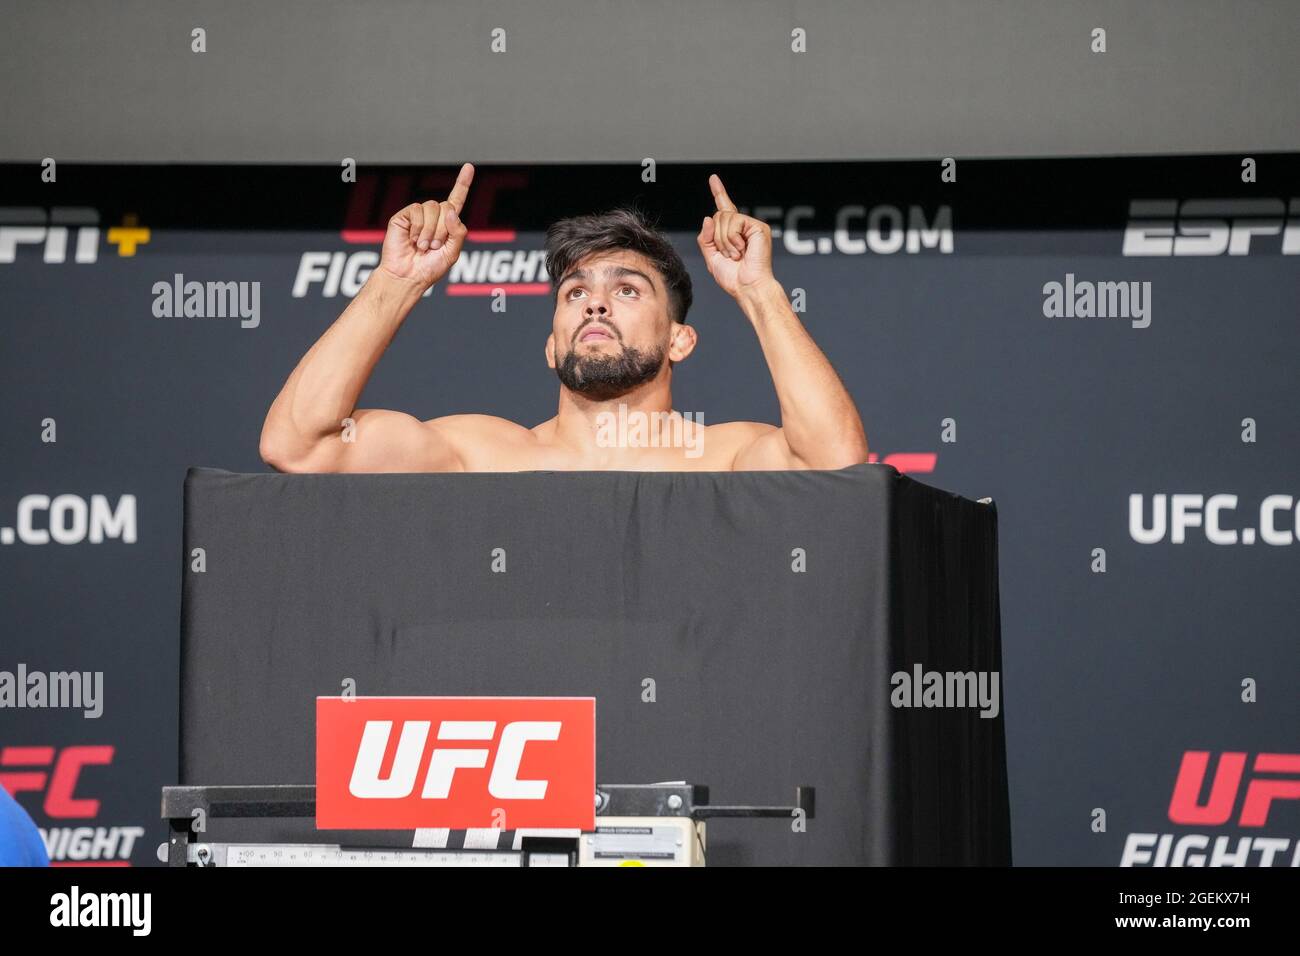 Las Vegas, USA. 20th Aug, 2021. LAS VEGAS, NV - AUGUST 20: Kelvin Gastelum steps on the scale for the official weigh-ins at UFC Apex for UFC Fight Night - Vegas 34 - Weigh-ins on August 20, 2021 in Las Vegas, NV, United States. (Photo by Louis Grasse/PxImages) Credit: Px Images/Alamy Live News Stock Photo